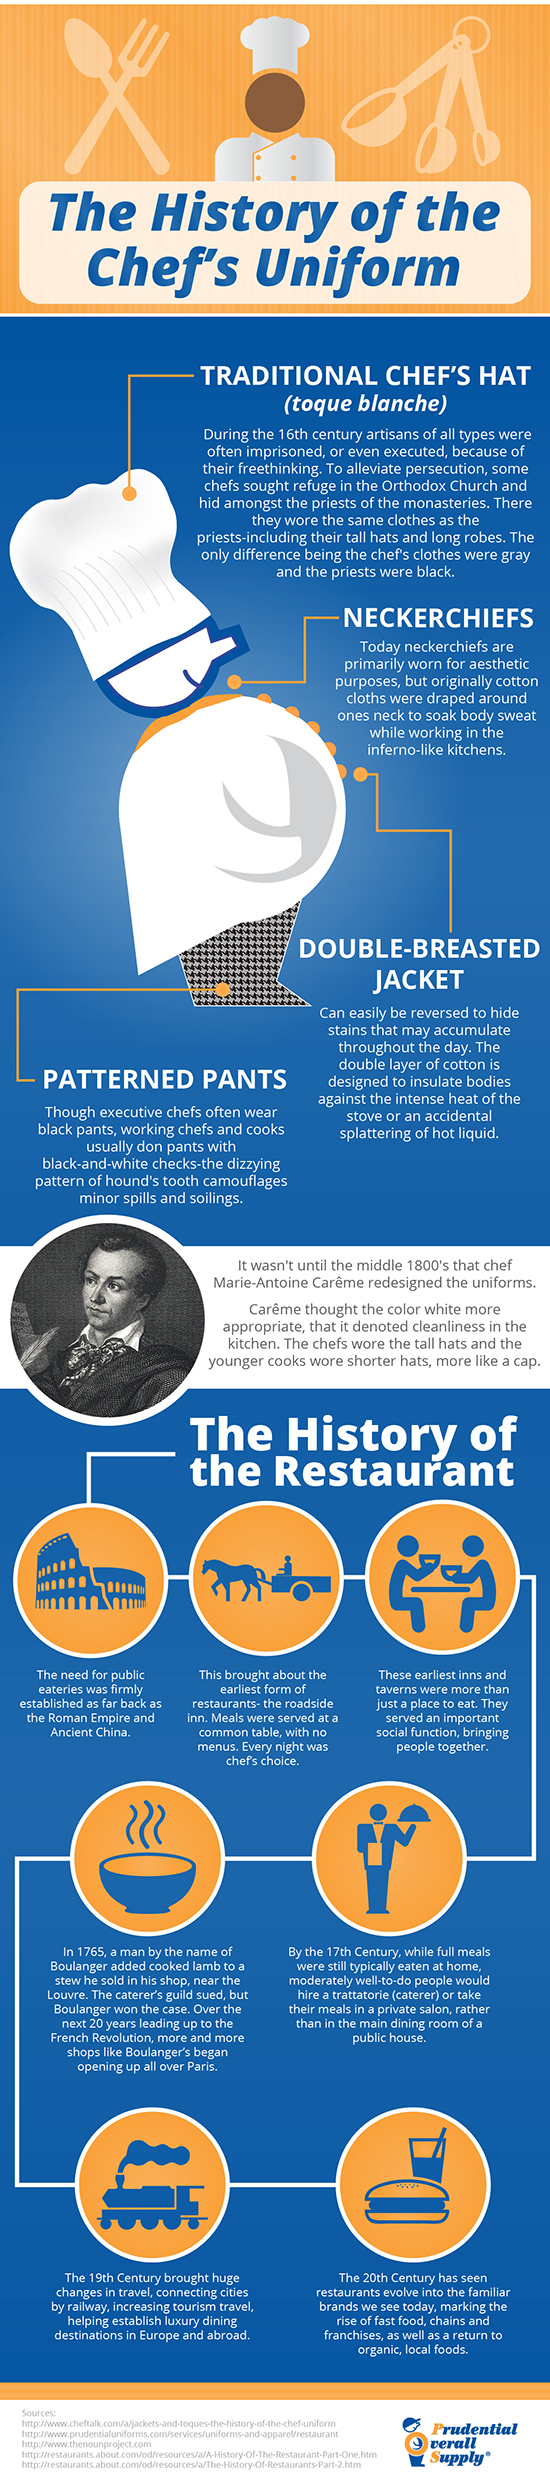 The History of the Chef's Uniform